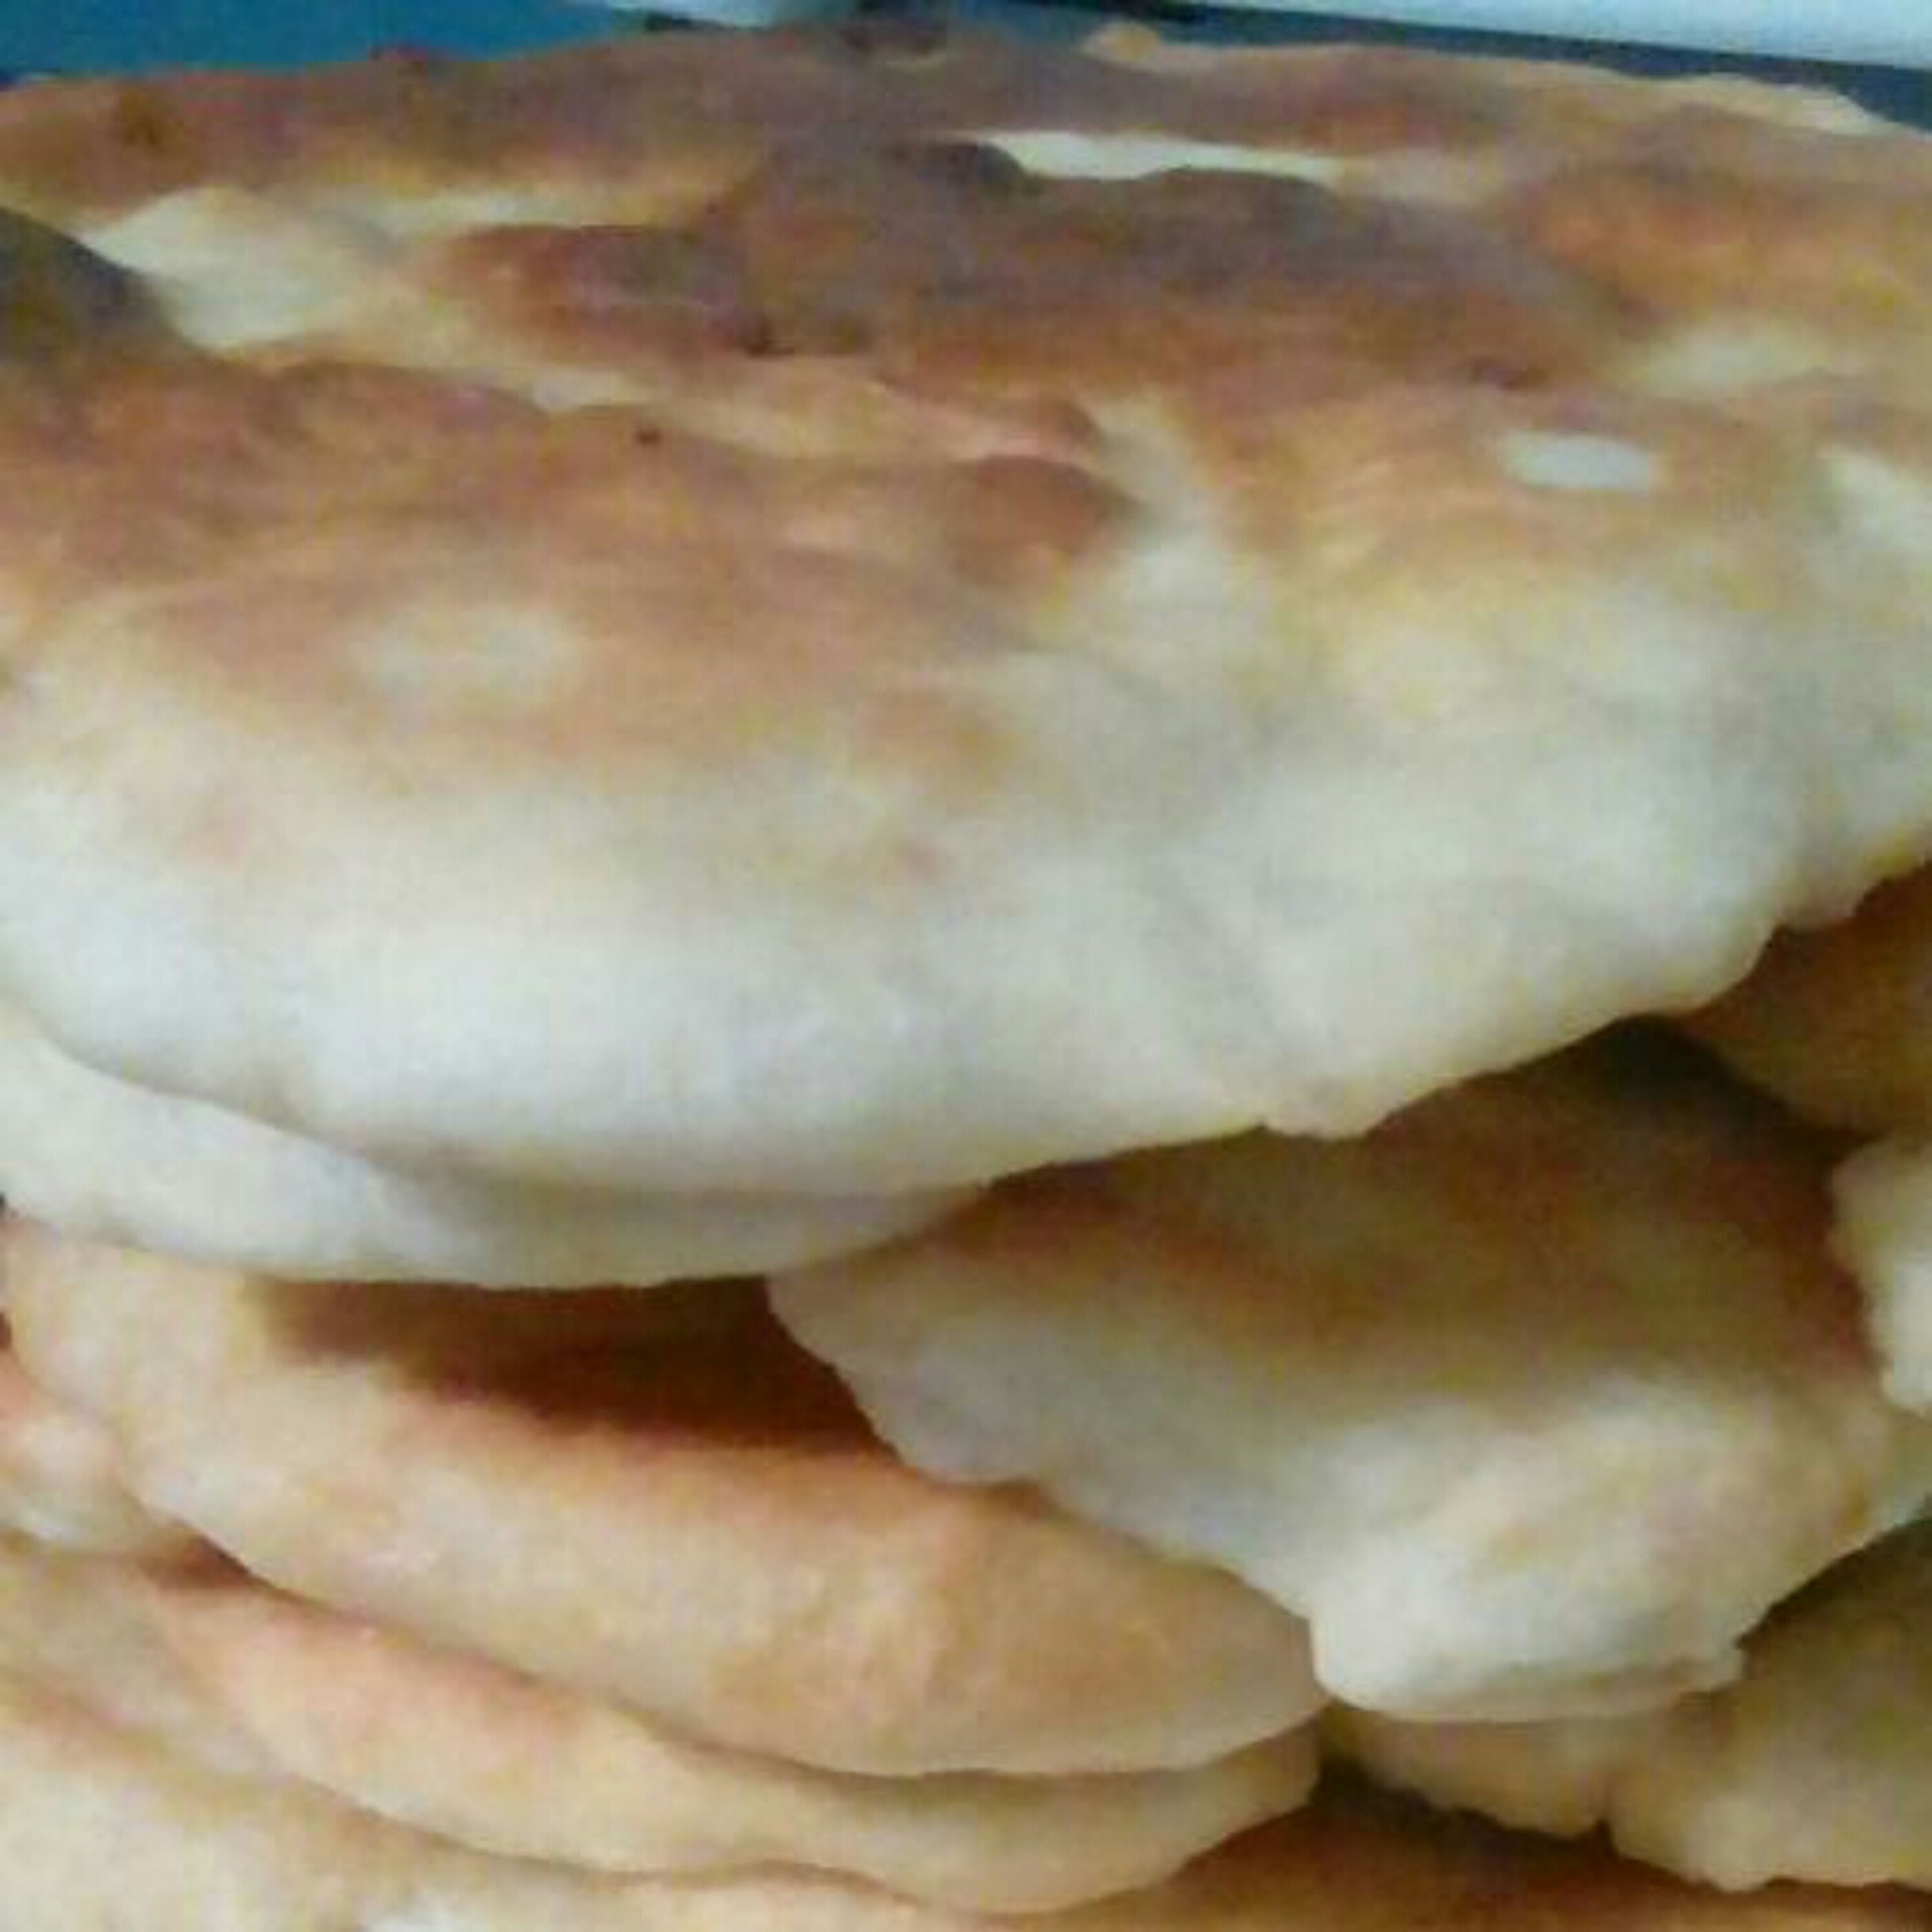 Make the frybread. Stir flour, baking powder, salt, buttermilk -until dough. knead the dough and place in 3\4 much deep oil in a pan. Break 3\4 cup of dough into the oil pan and fry numerous times.